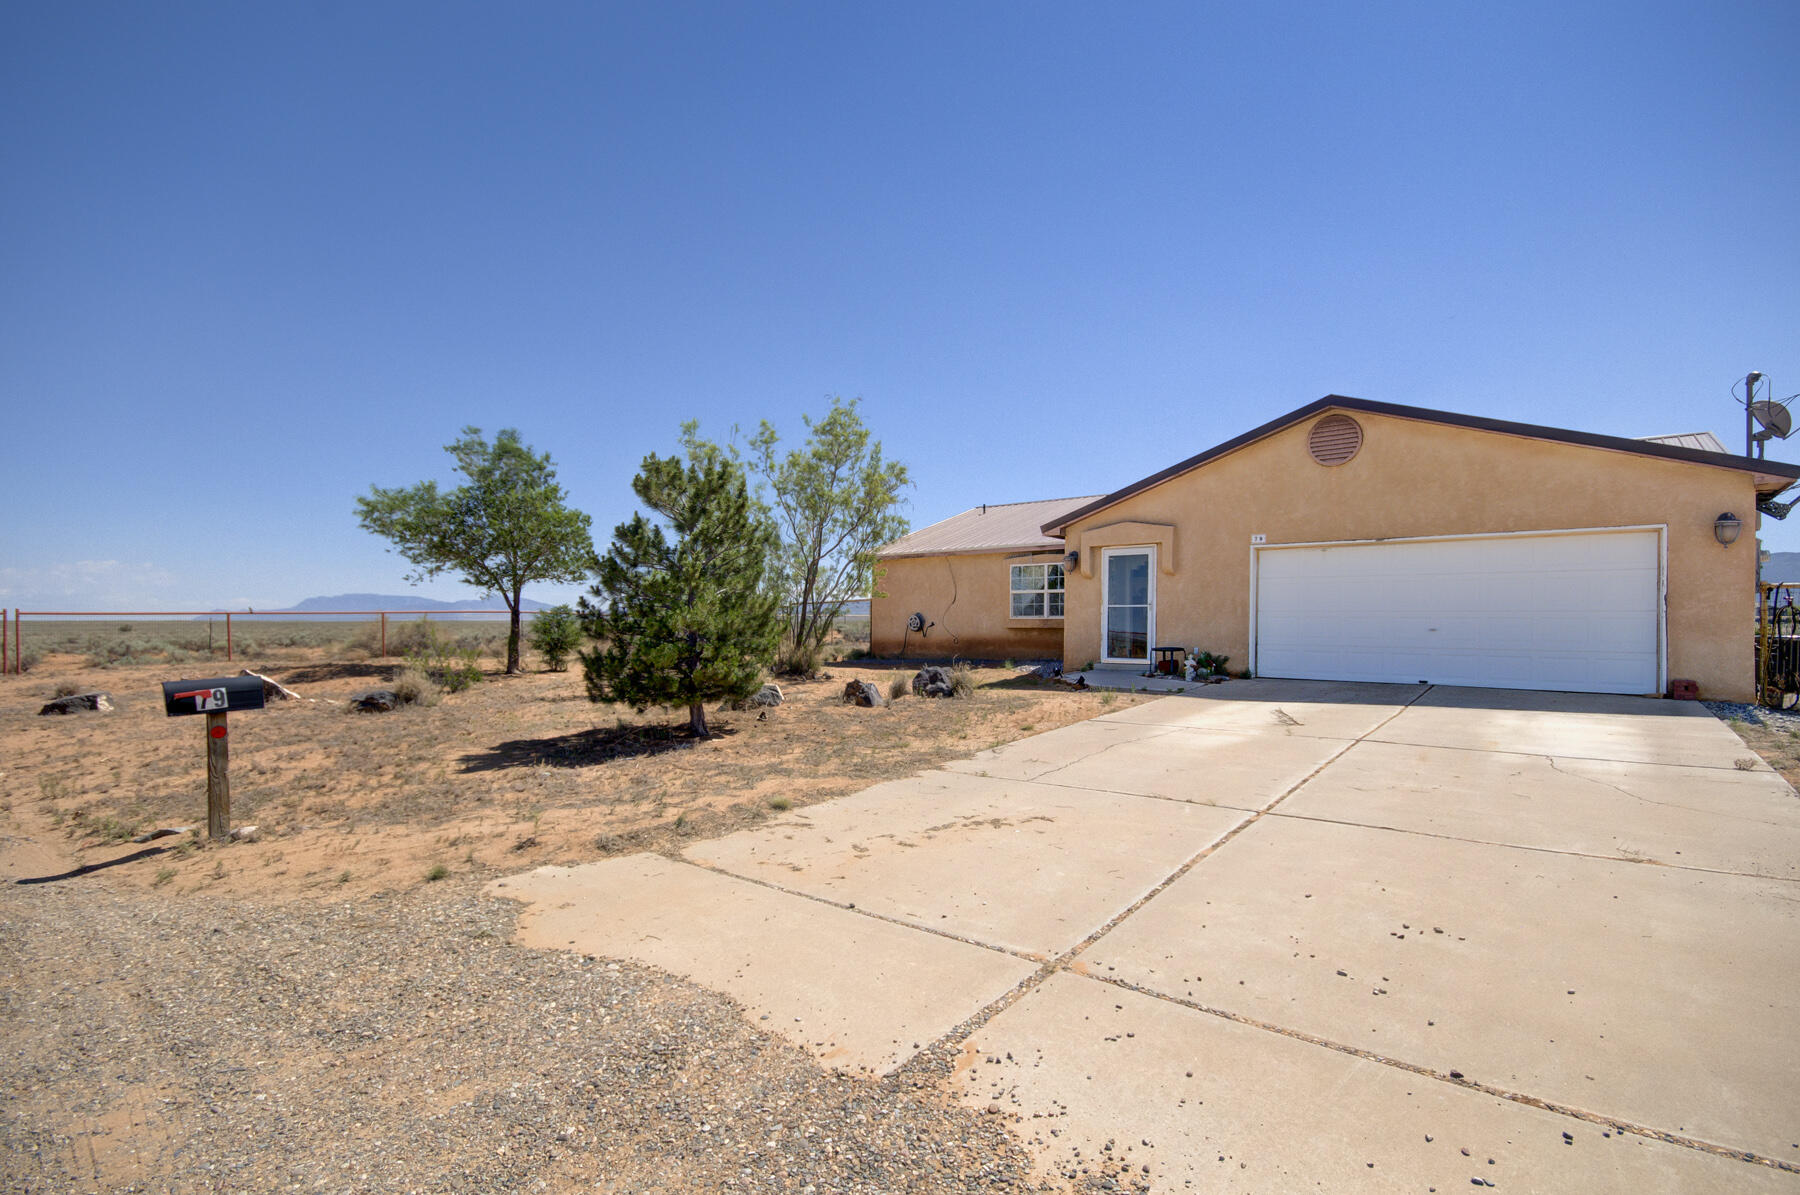 Welcome to this beautiful one story home with lovely curb appeal in the Los Lunas on a .77 acre lot. This home features an open floor plan with the kitchen looking into a wonderful living room with high ceilings and a fireplace. There are two guest bedrooms and a guest bathroom. REFRIGERATED AIR, METAL ROOF, and NATURAL GAS. The master bedroom has a walk-in shower.  The backdoor leads to the patio area where you can enjoy your little piece of paradise with the most AMAZING VIEWS!!